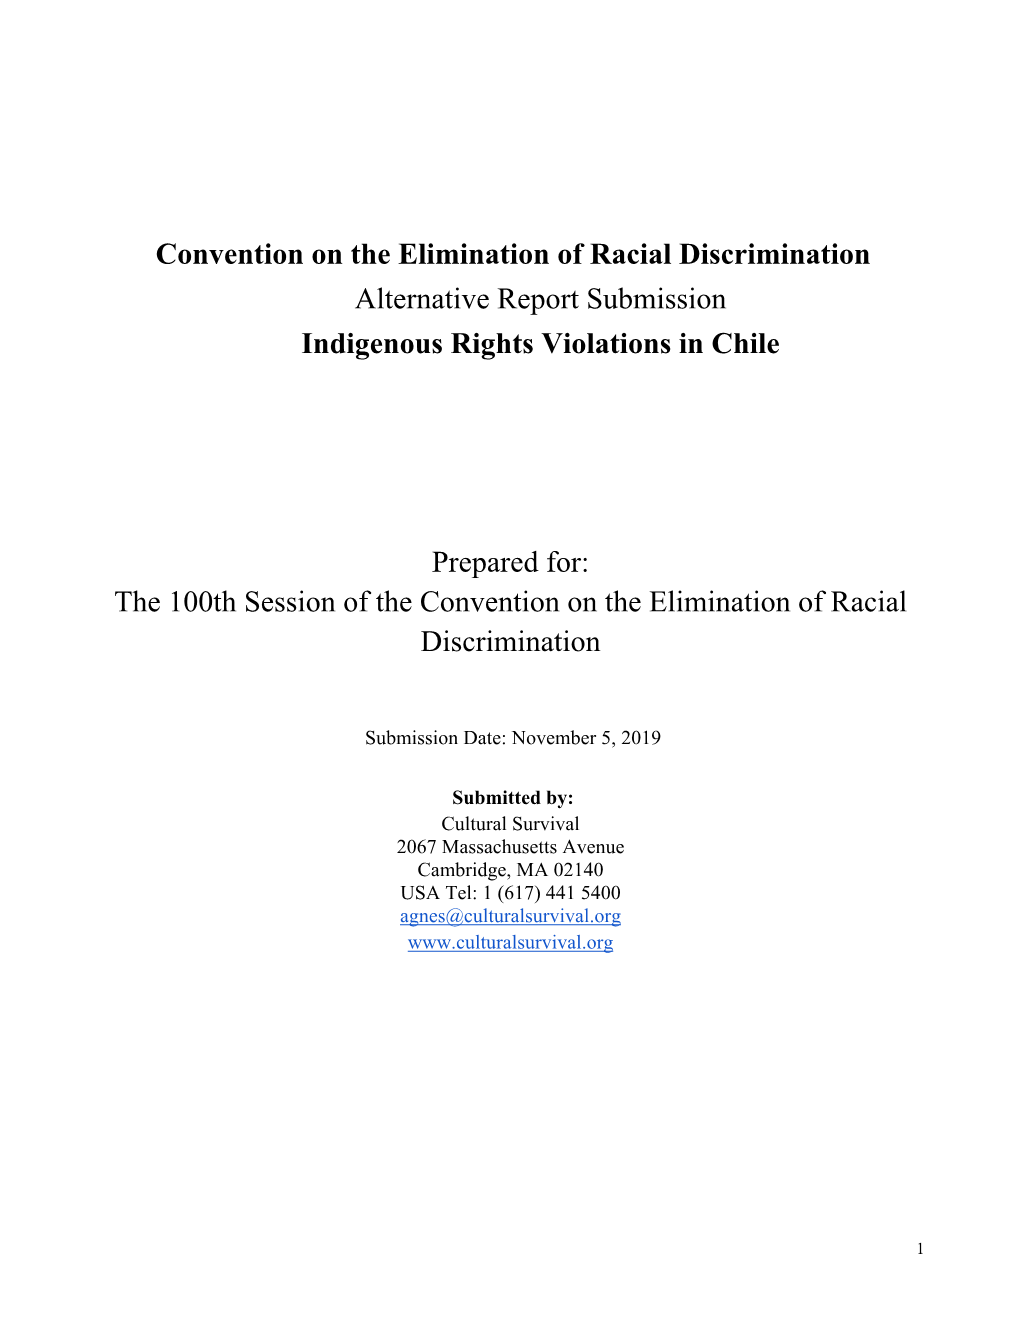 Convention on the Elimination of Racial Discrimination Alternative Report Submission Indigenous Rights Violations in Chile Prep